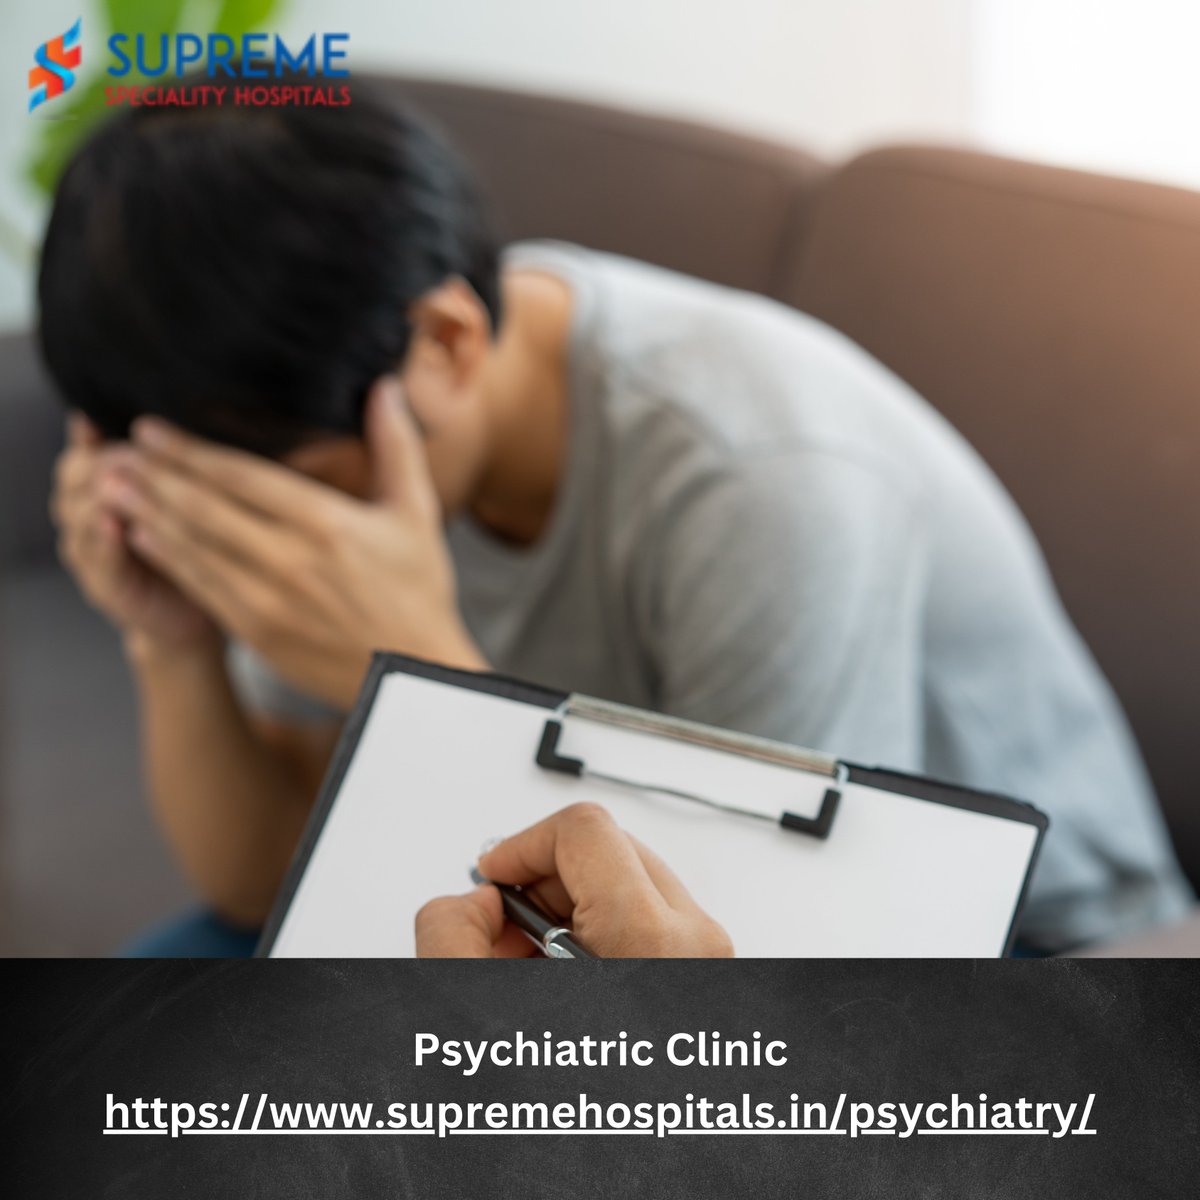 Psychiatric Clinic
supremehospitals.in/psychiatry/
A psychiatric clinic is a healthcare facility that specializes in the diagnosis, treatment, and management of mental health disorders.
#PsychiatricClinic
#MentalHealthCare
#PsychiatryServices
#MentalHealthSupport
#PsychiatricTreatment